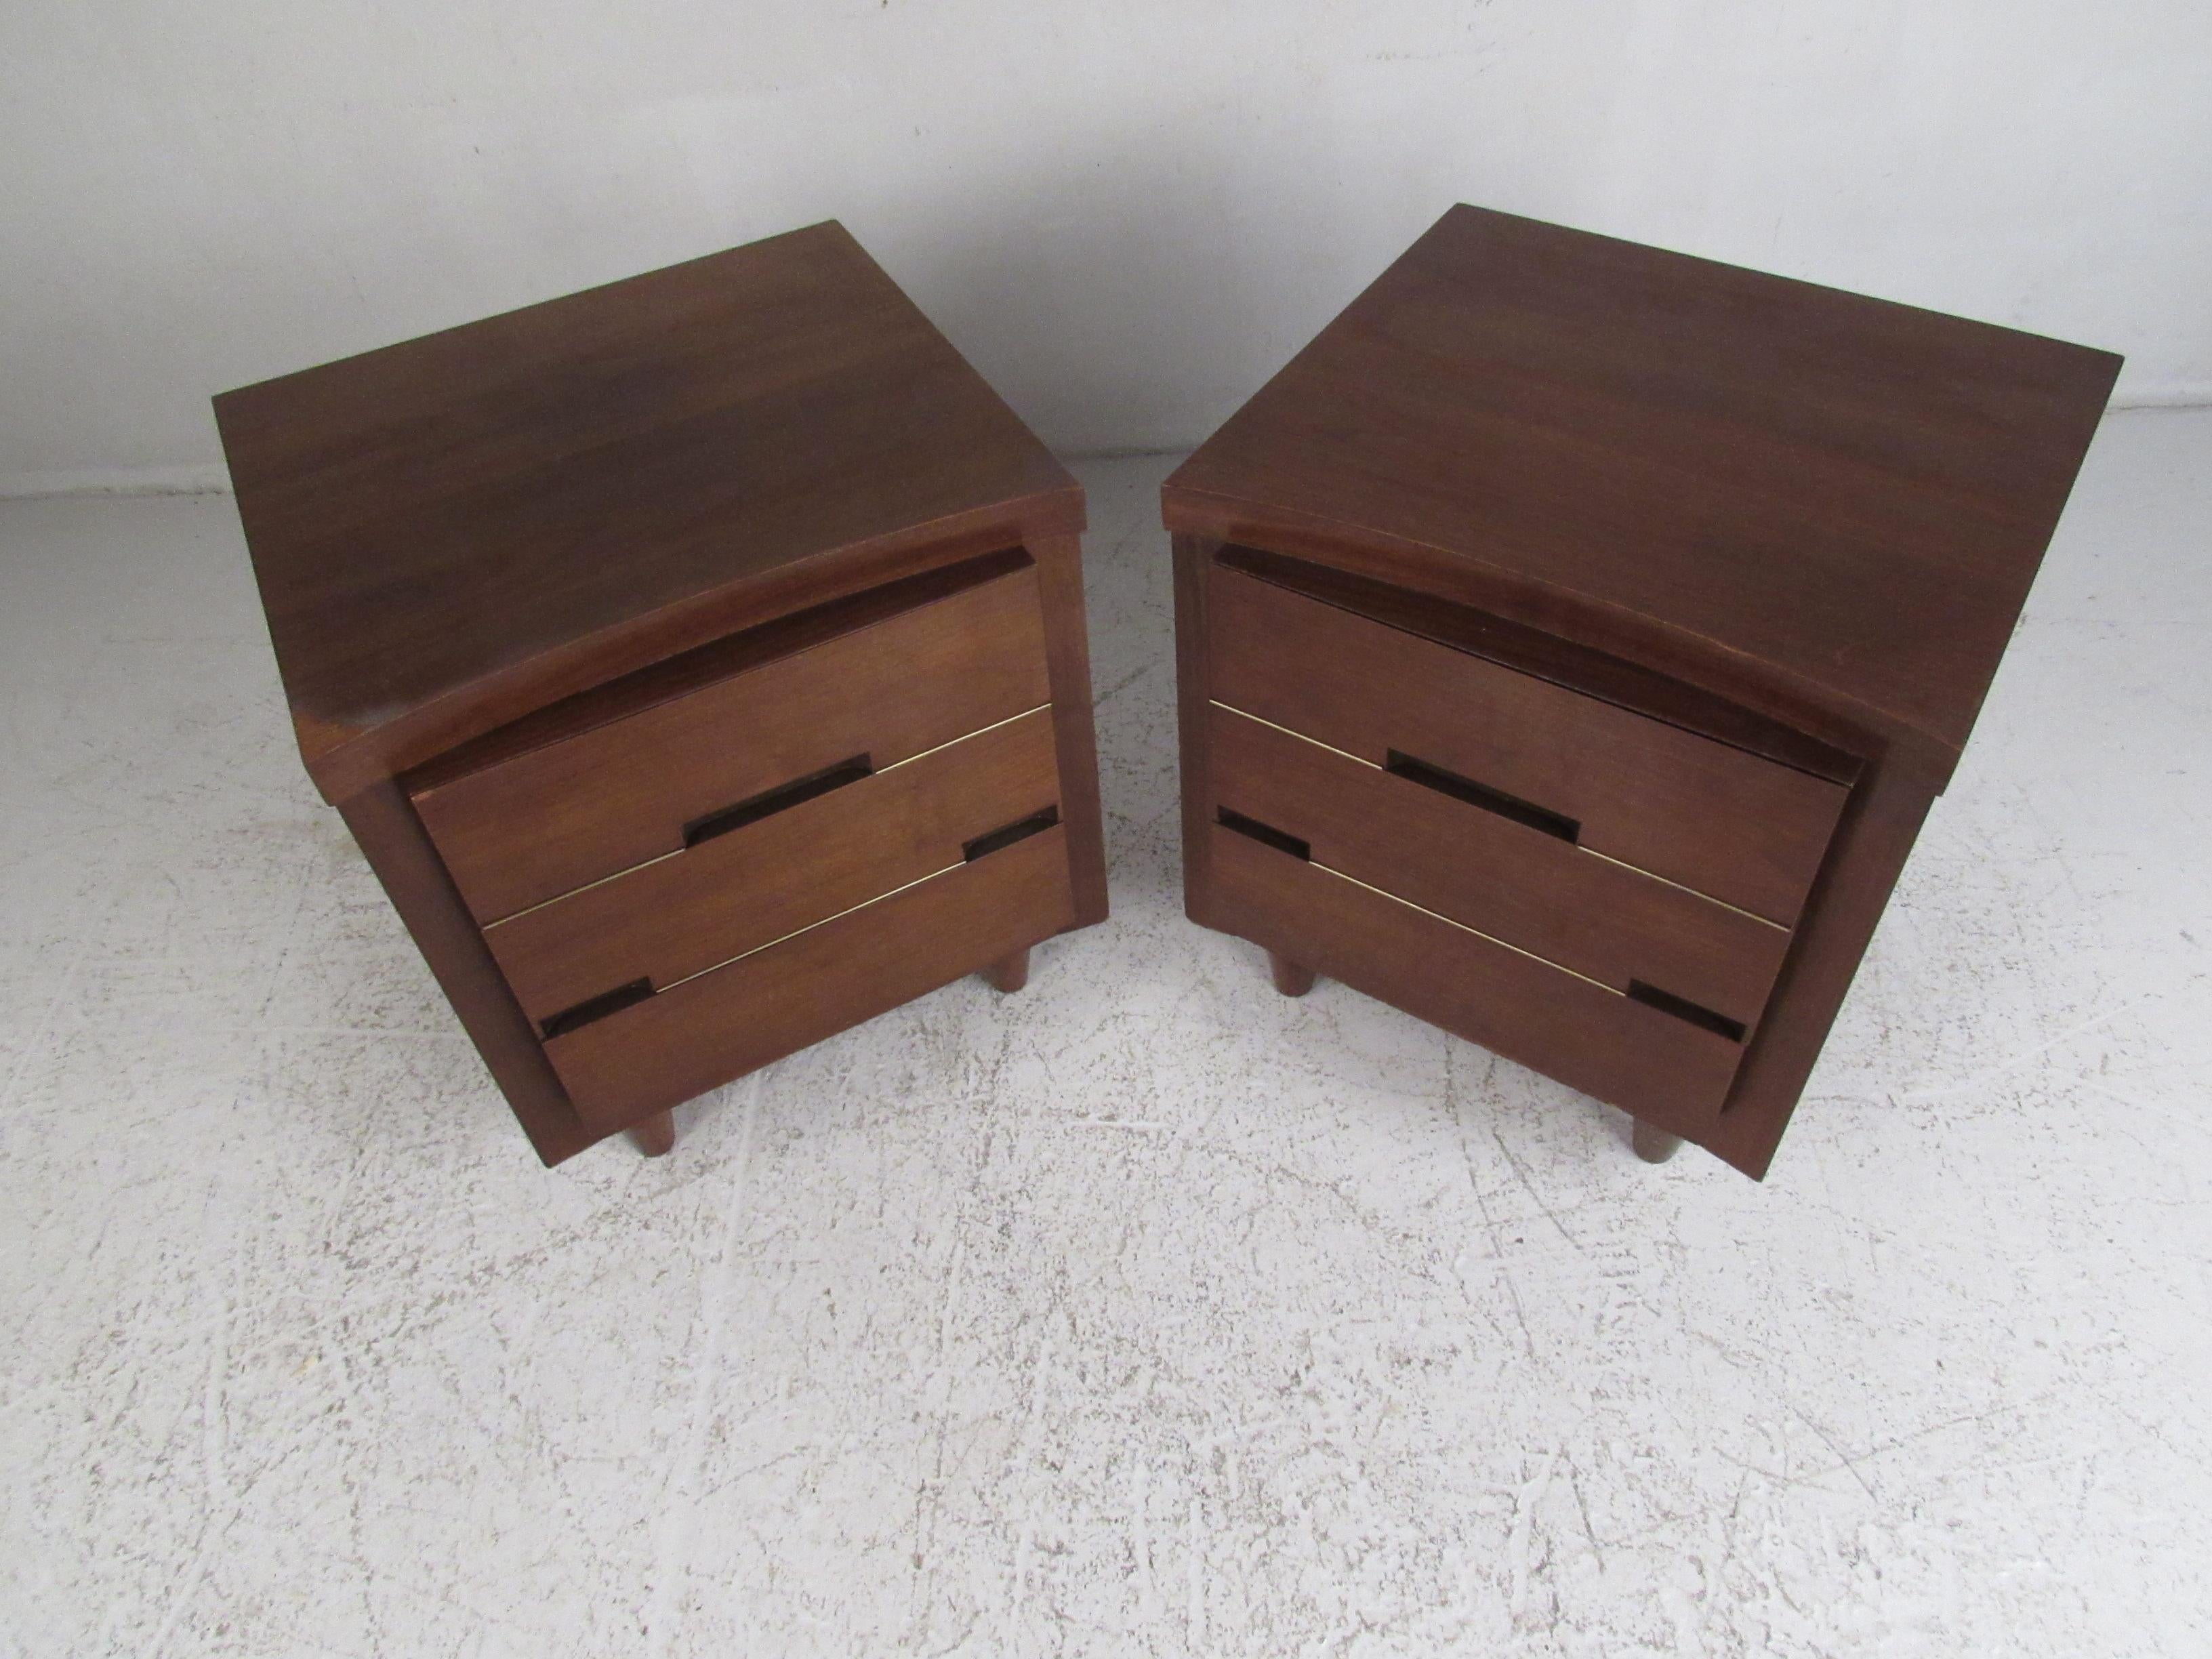 This stunning pair of vintage modern end tables boast unusual drawer fronts with recessed pulls. Quality construction with curved front tops, stubby tapered legs, and a vintage walnut finish. This charming pair of nightstands make the perfect